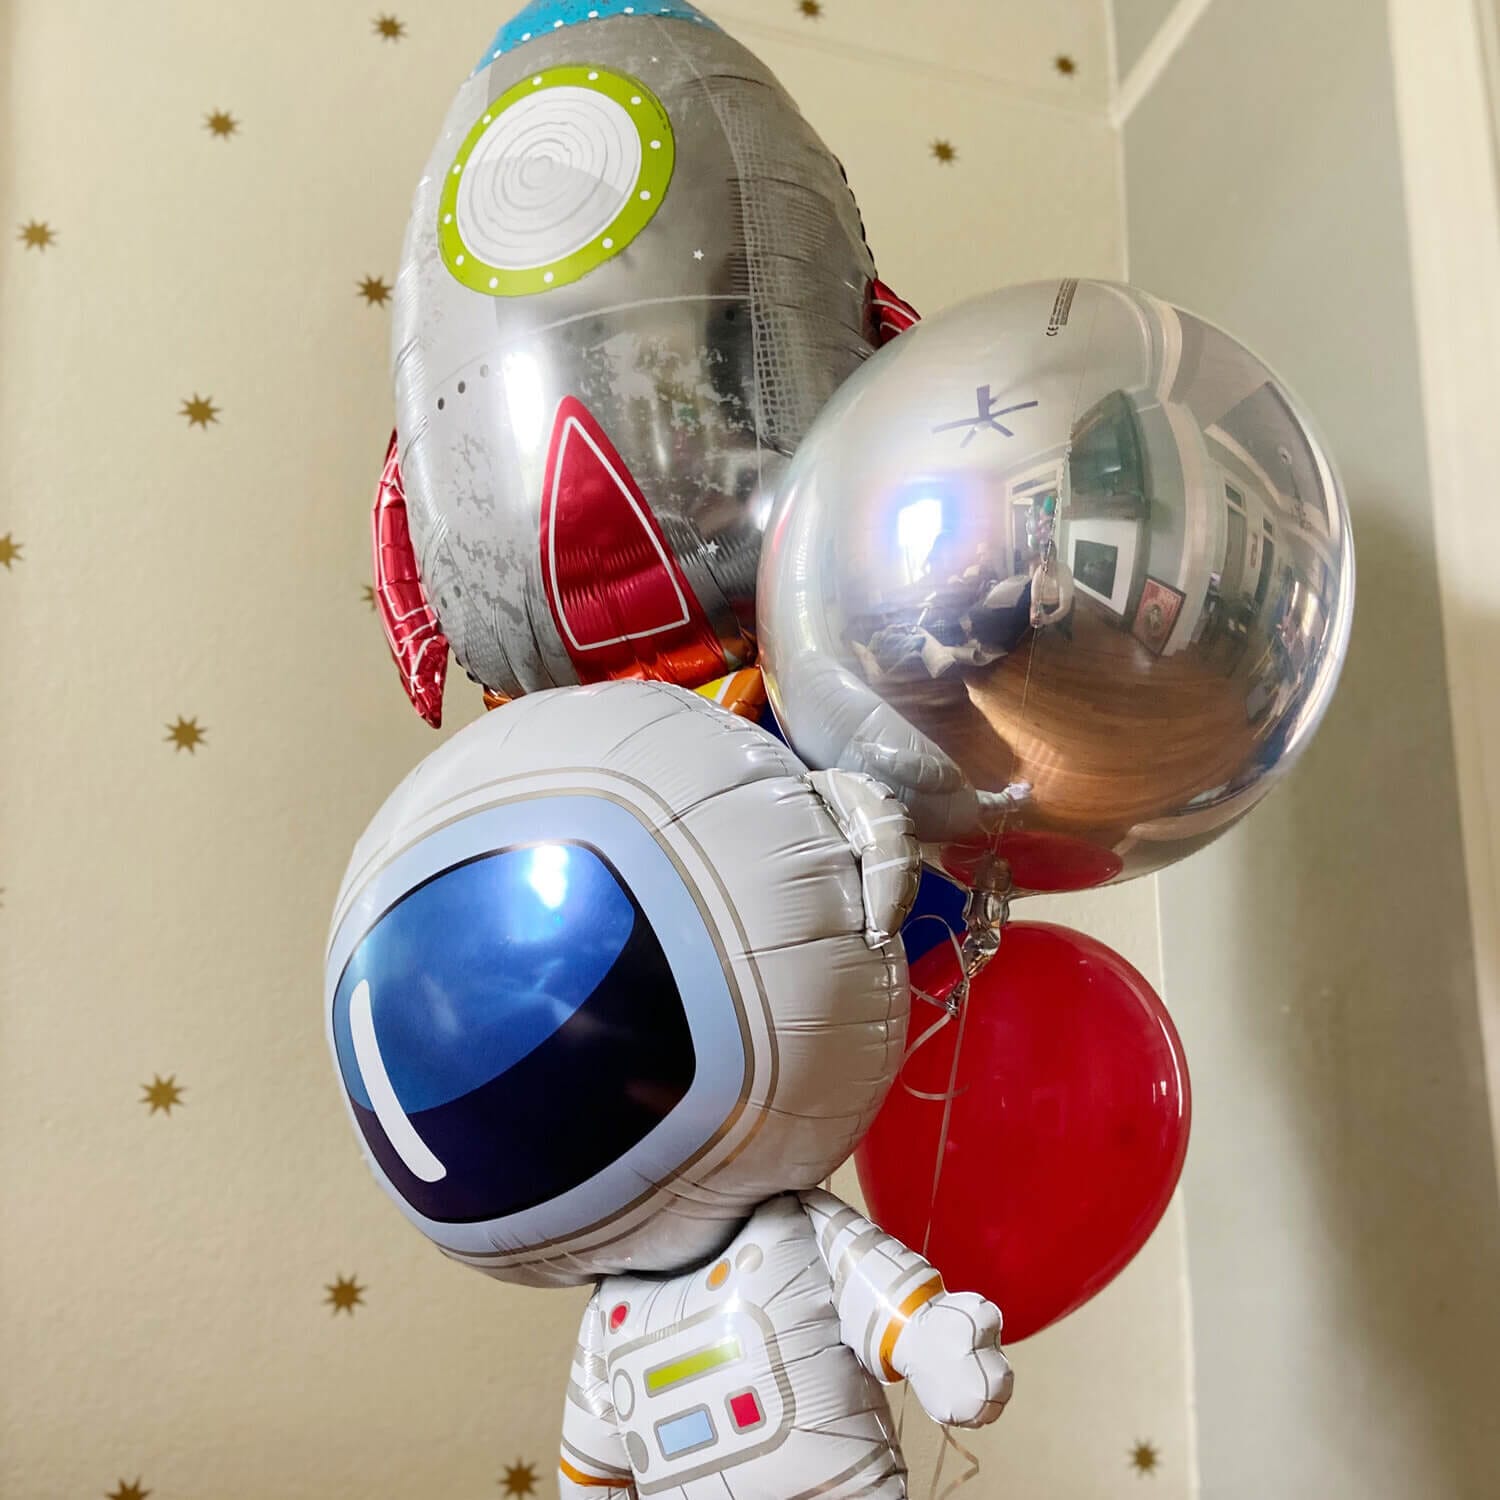 Just Peachy makes oversized helium bouquets like this one with astronaut, rocket ship, and silver orb balloons.